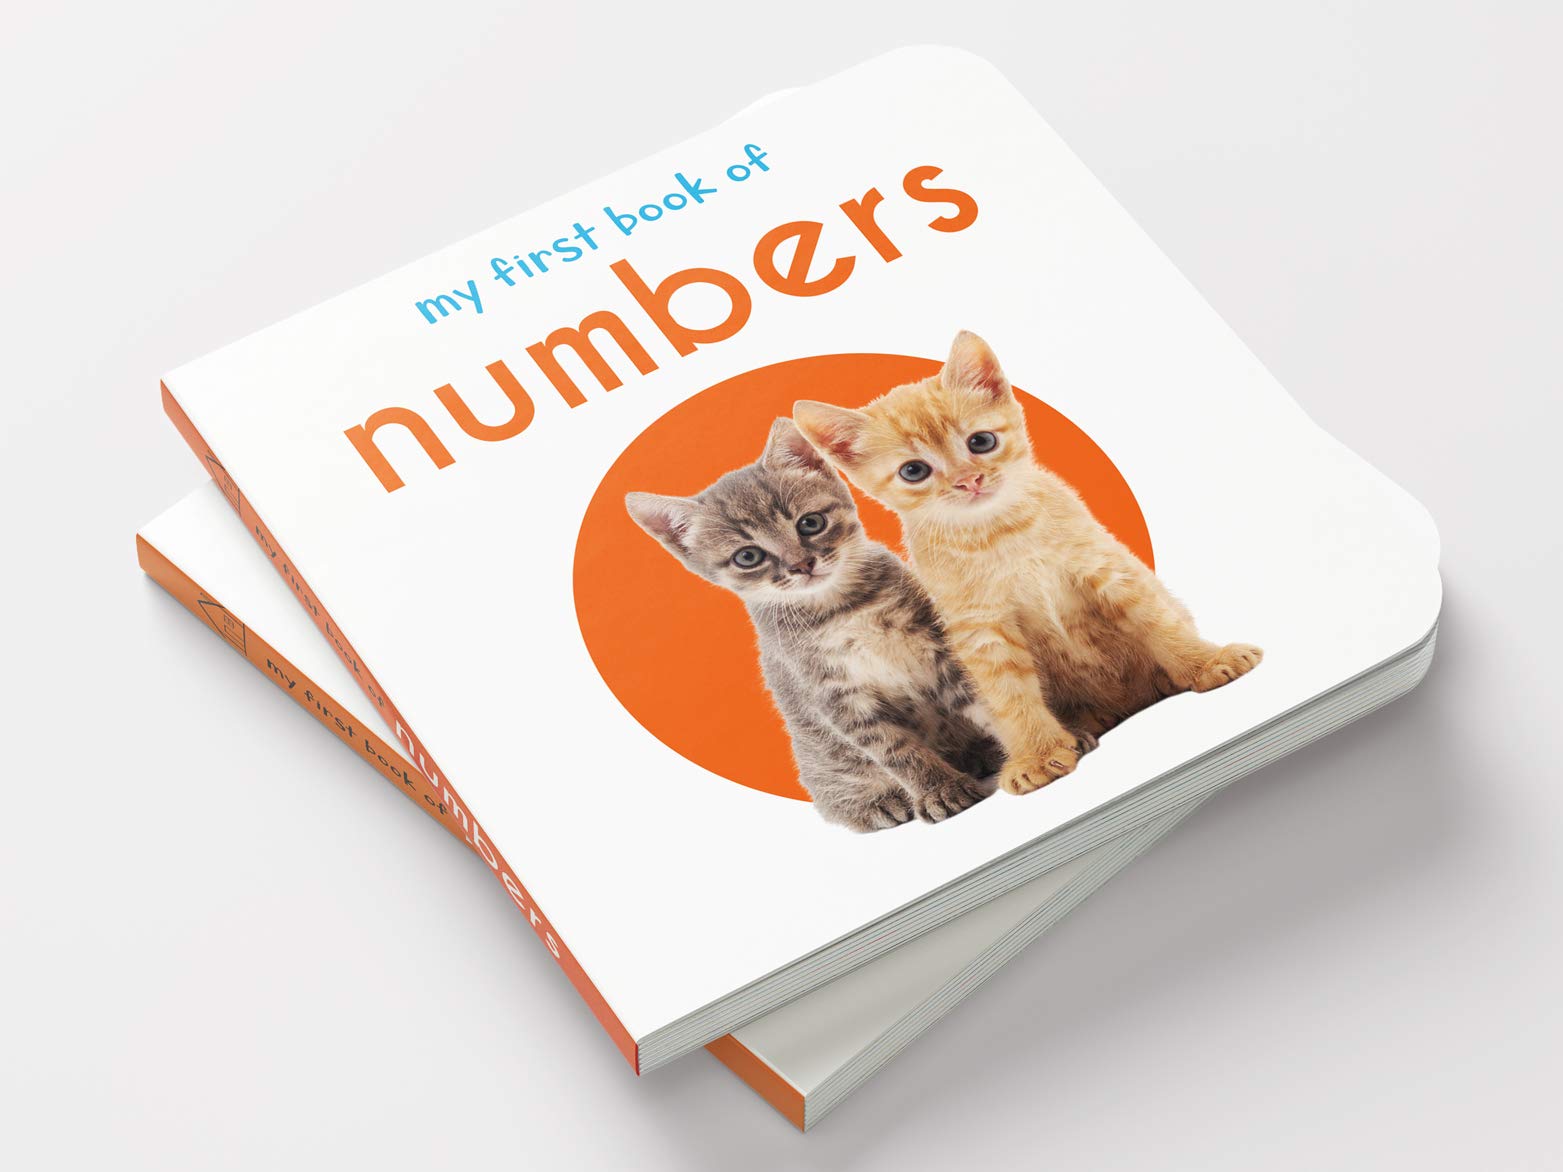 My First Book Of Numbers: First Board Book